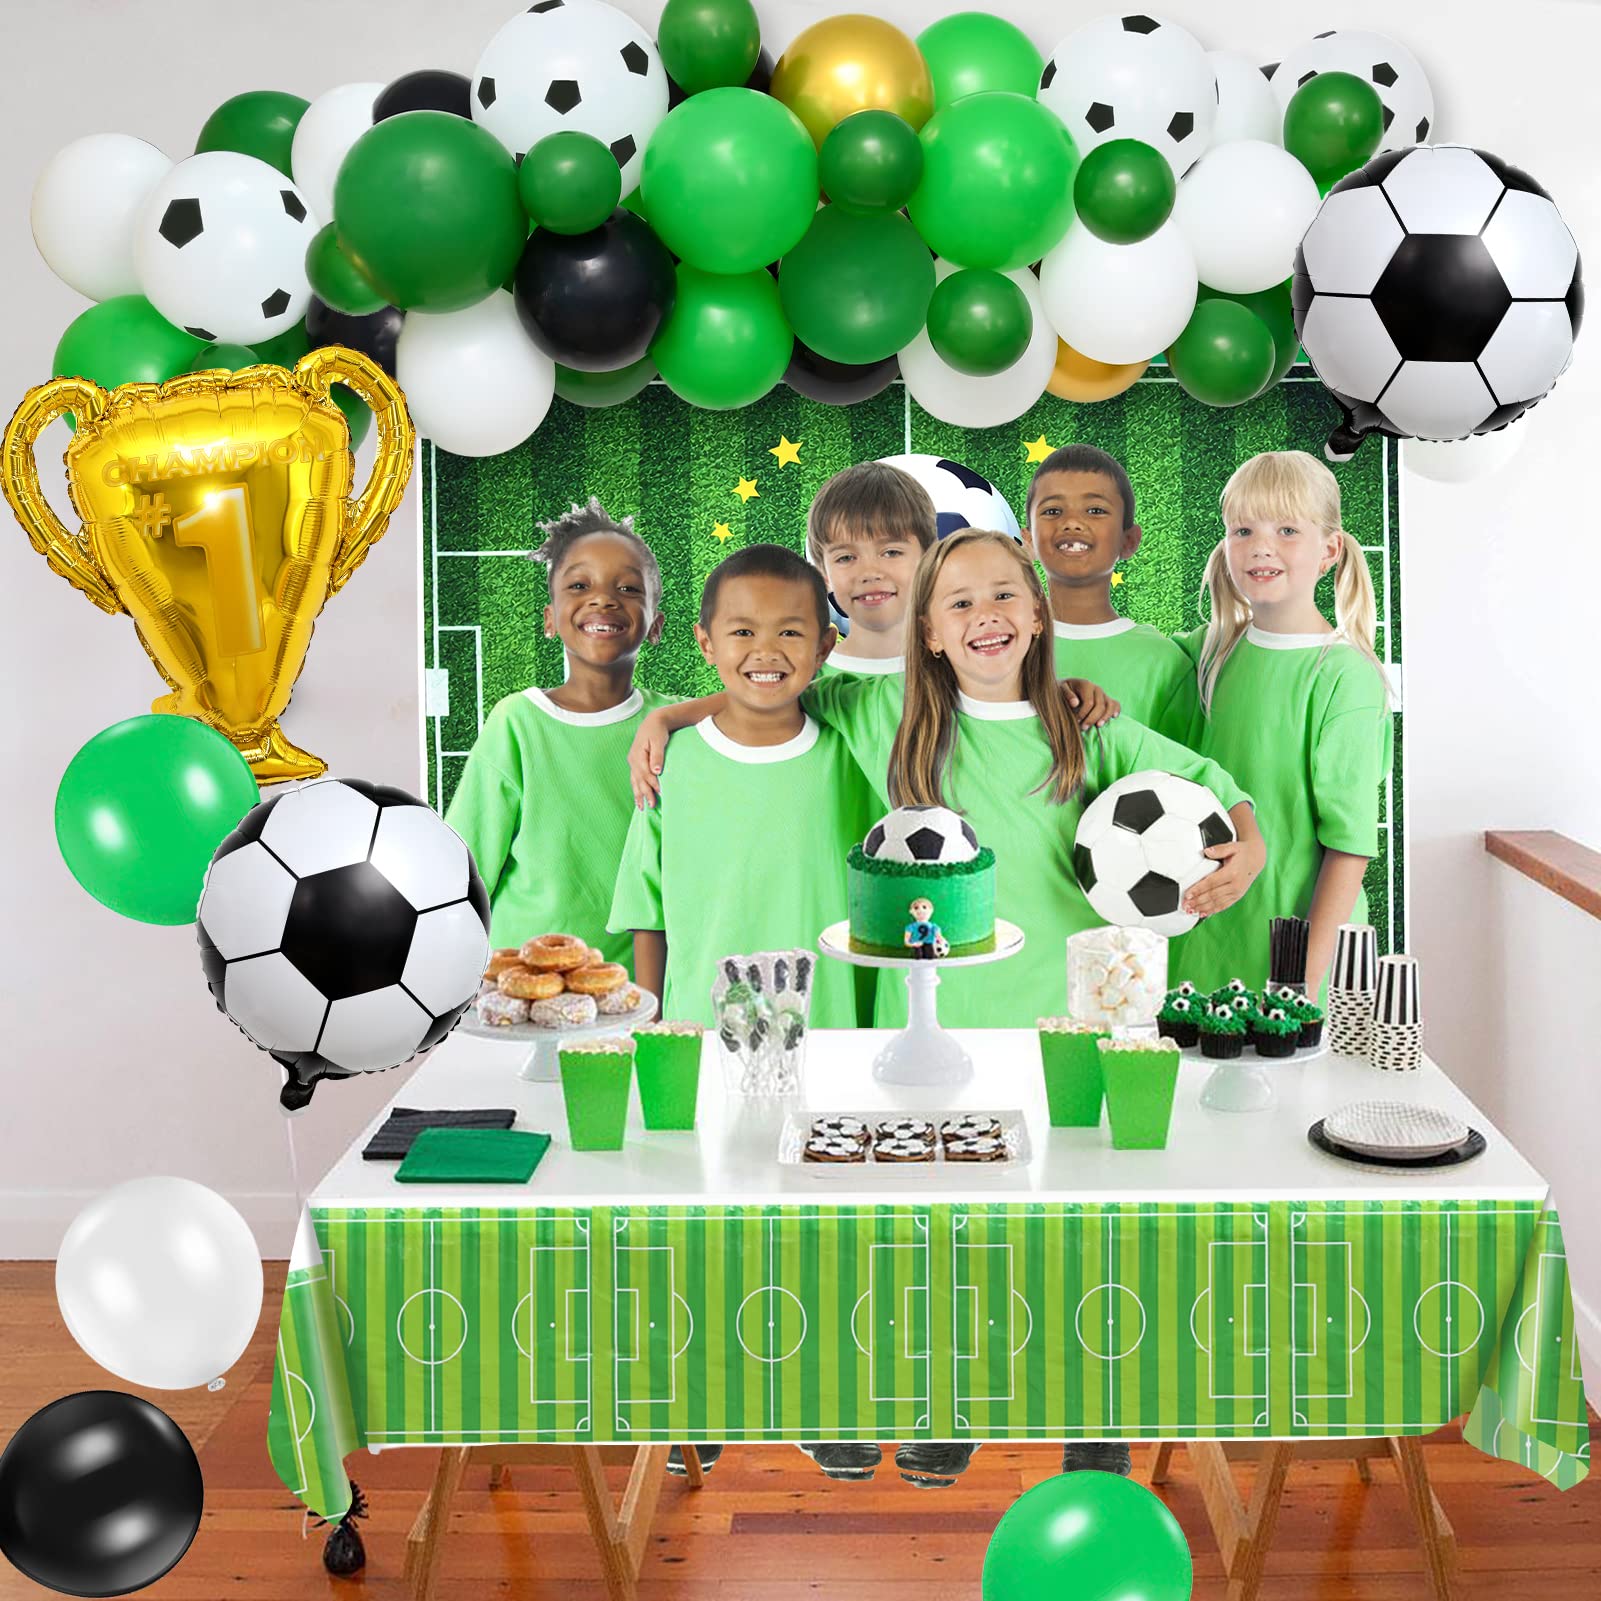 Winrayk Soccer Party Decorations Birthday Supplies Soccer Balloons Garland Arch Kit with Soccer Backdrop Tablecloth Champion Trophy Soccer Foil Balloon Men Teen Kids Soccer Birthday Party Supplies